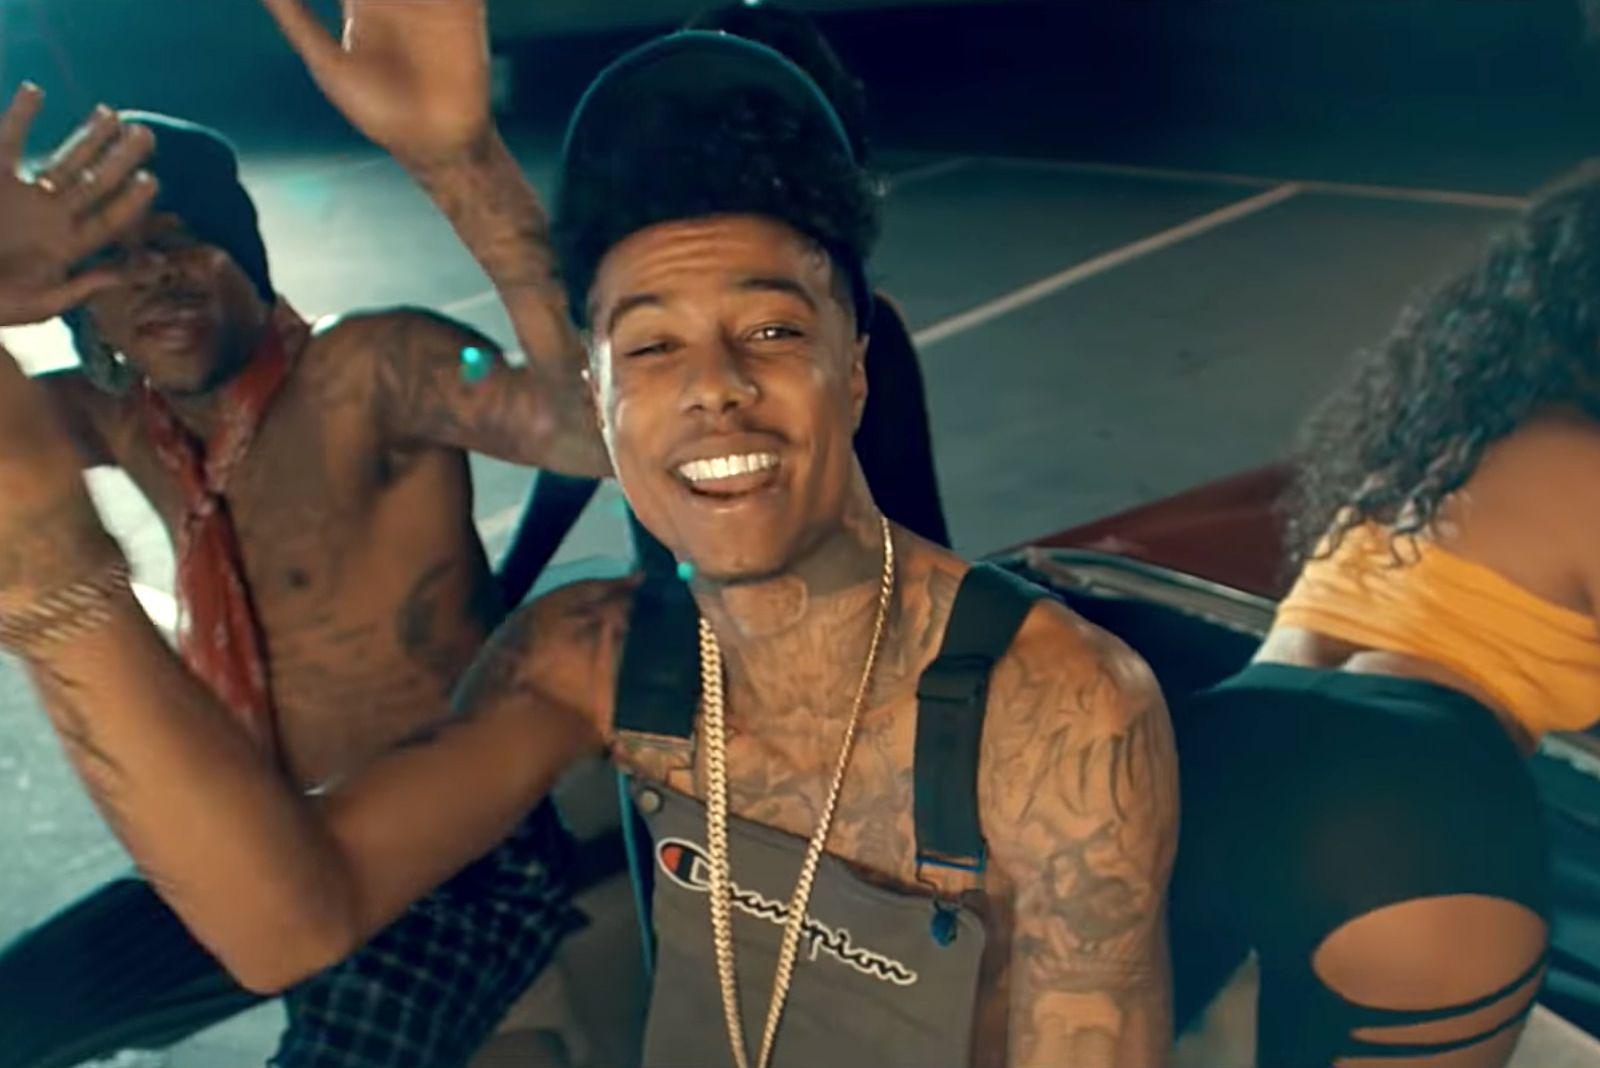 Who Is Blueface? 'Thotiana' Vid Partially Based on Rapper's Life